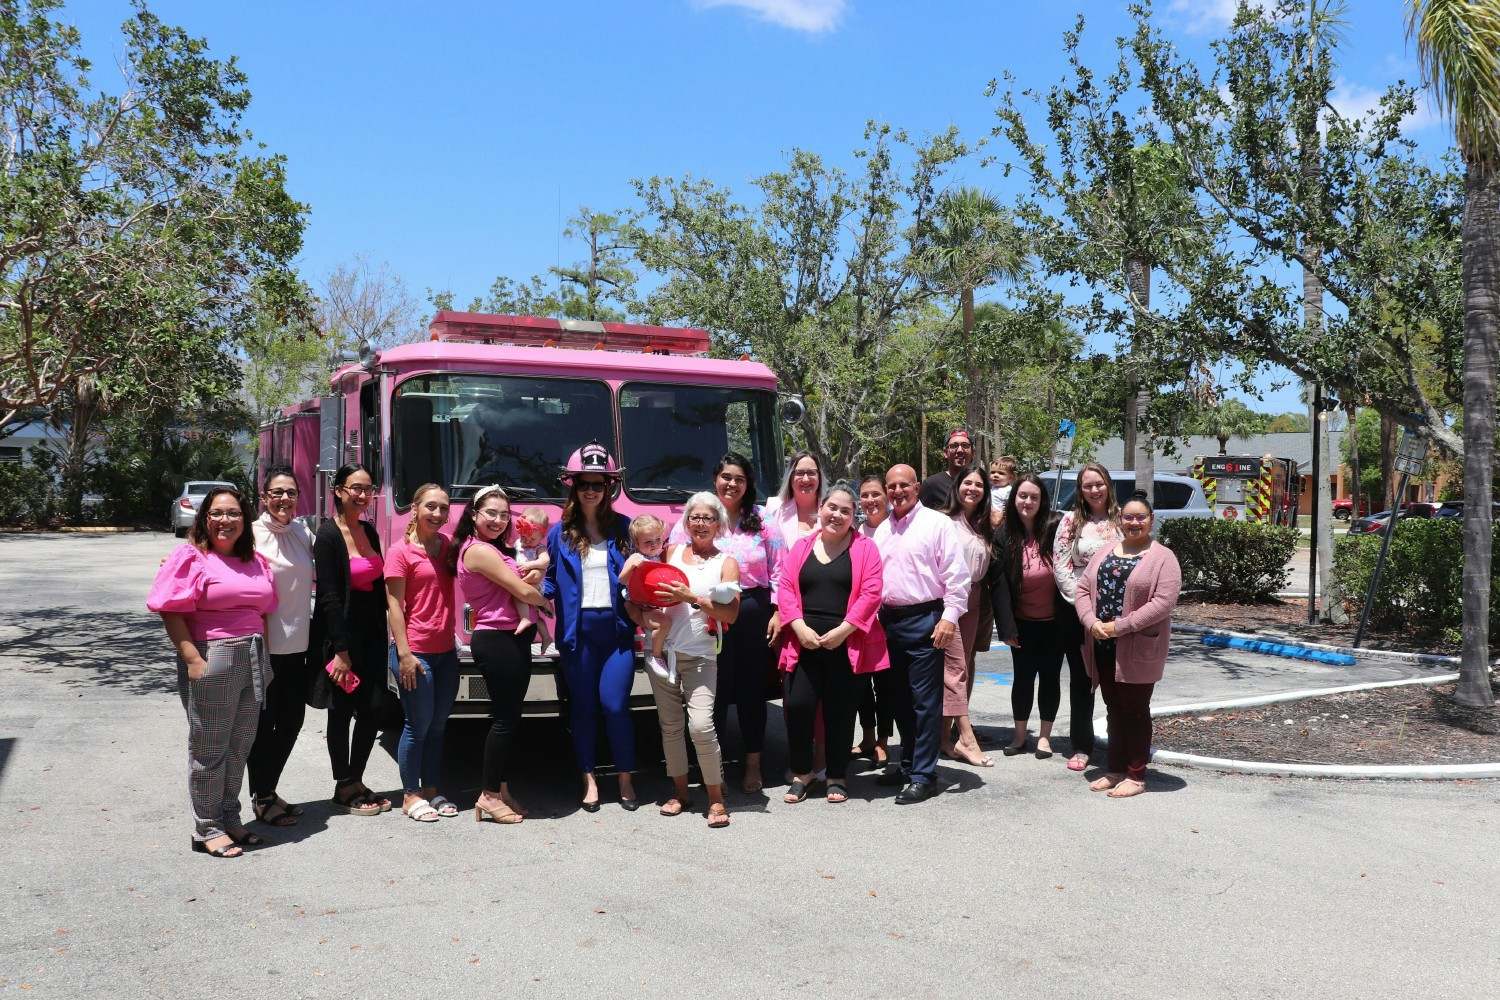 Pink Heals - Celebrating, Kayla Grayson, our Chief Operating Officer's victory against Breast Cancer.